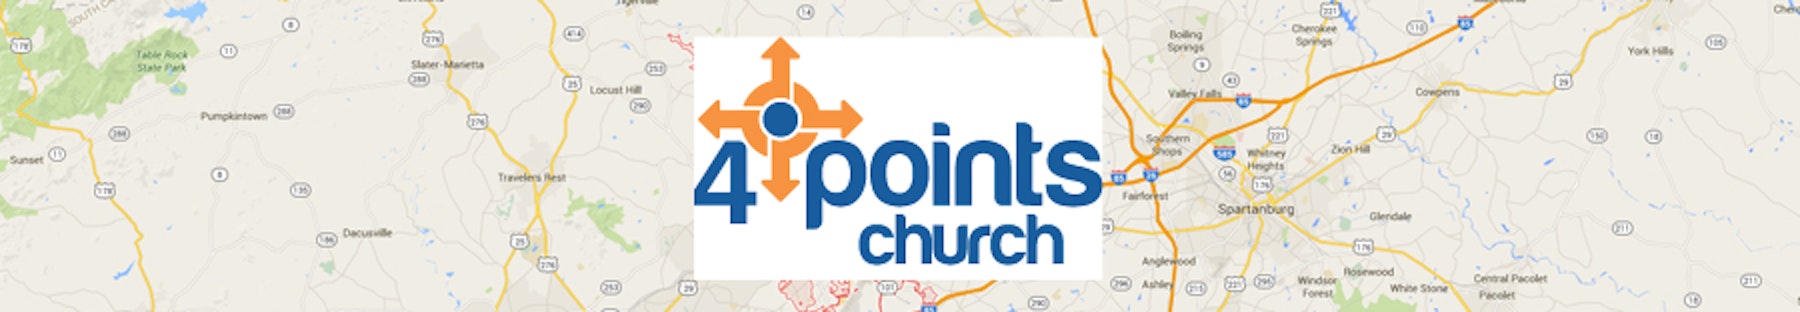 4 Points Church: Endless Possibilities